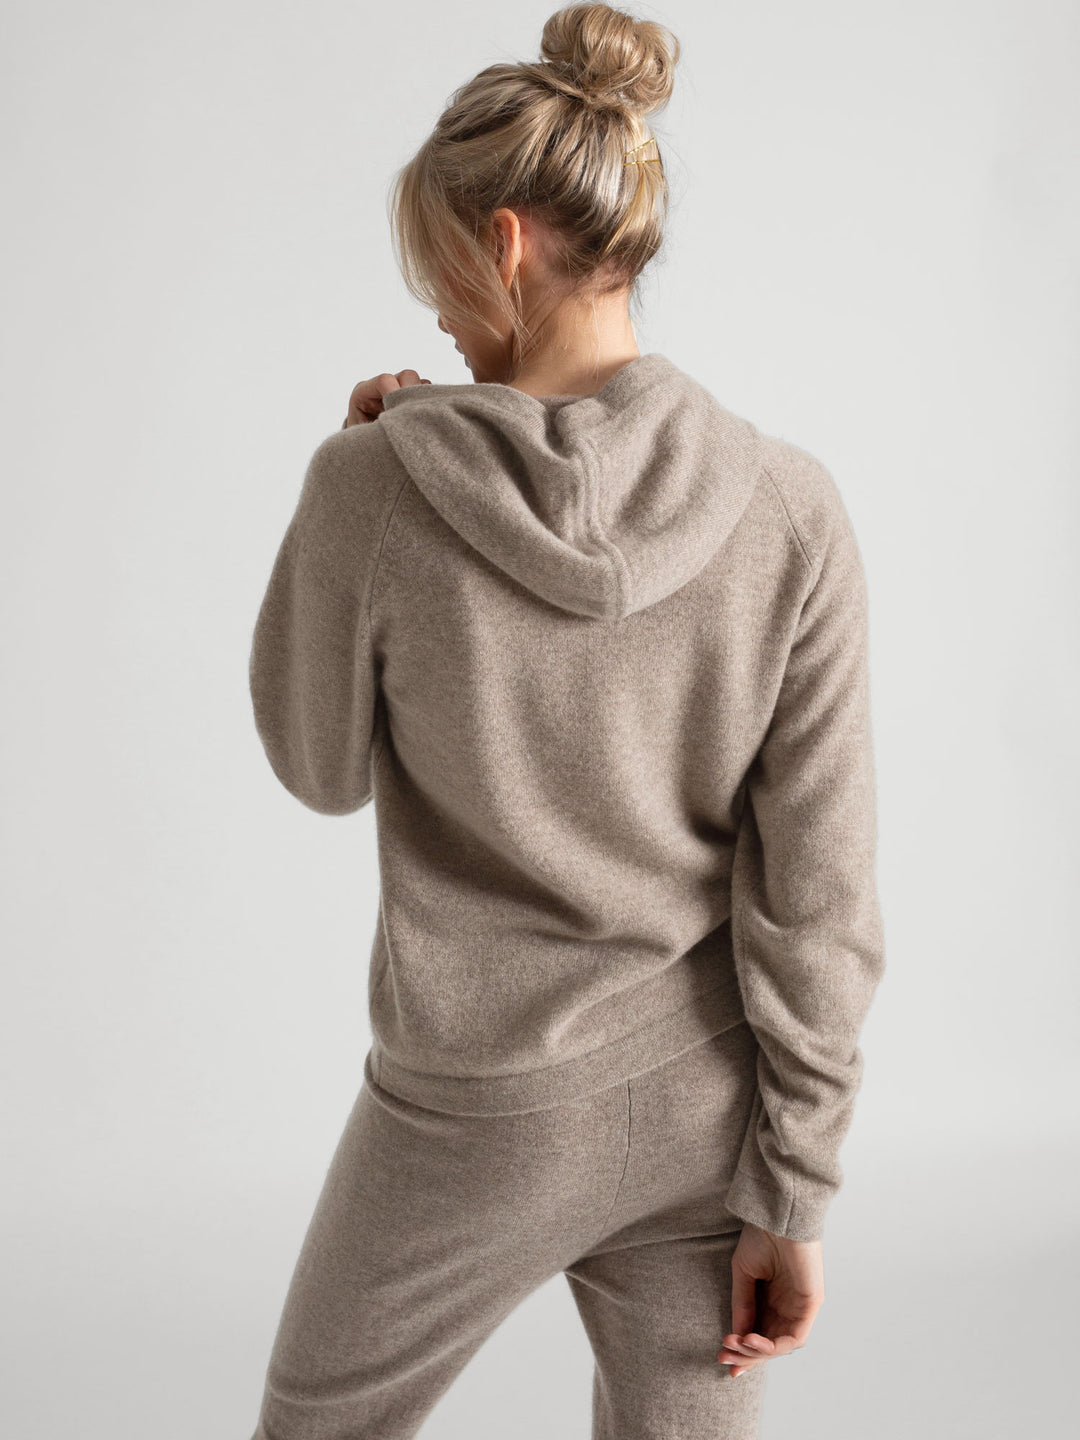 Cashmere hoodie made of 100% pure cashmere. Color: Toast. Scandinavian design by Kashmina.